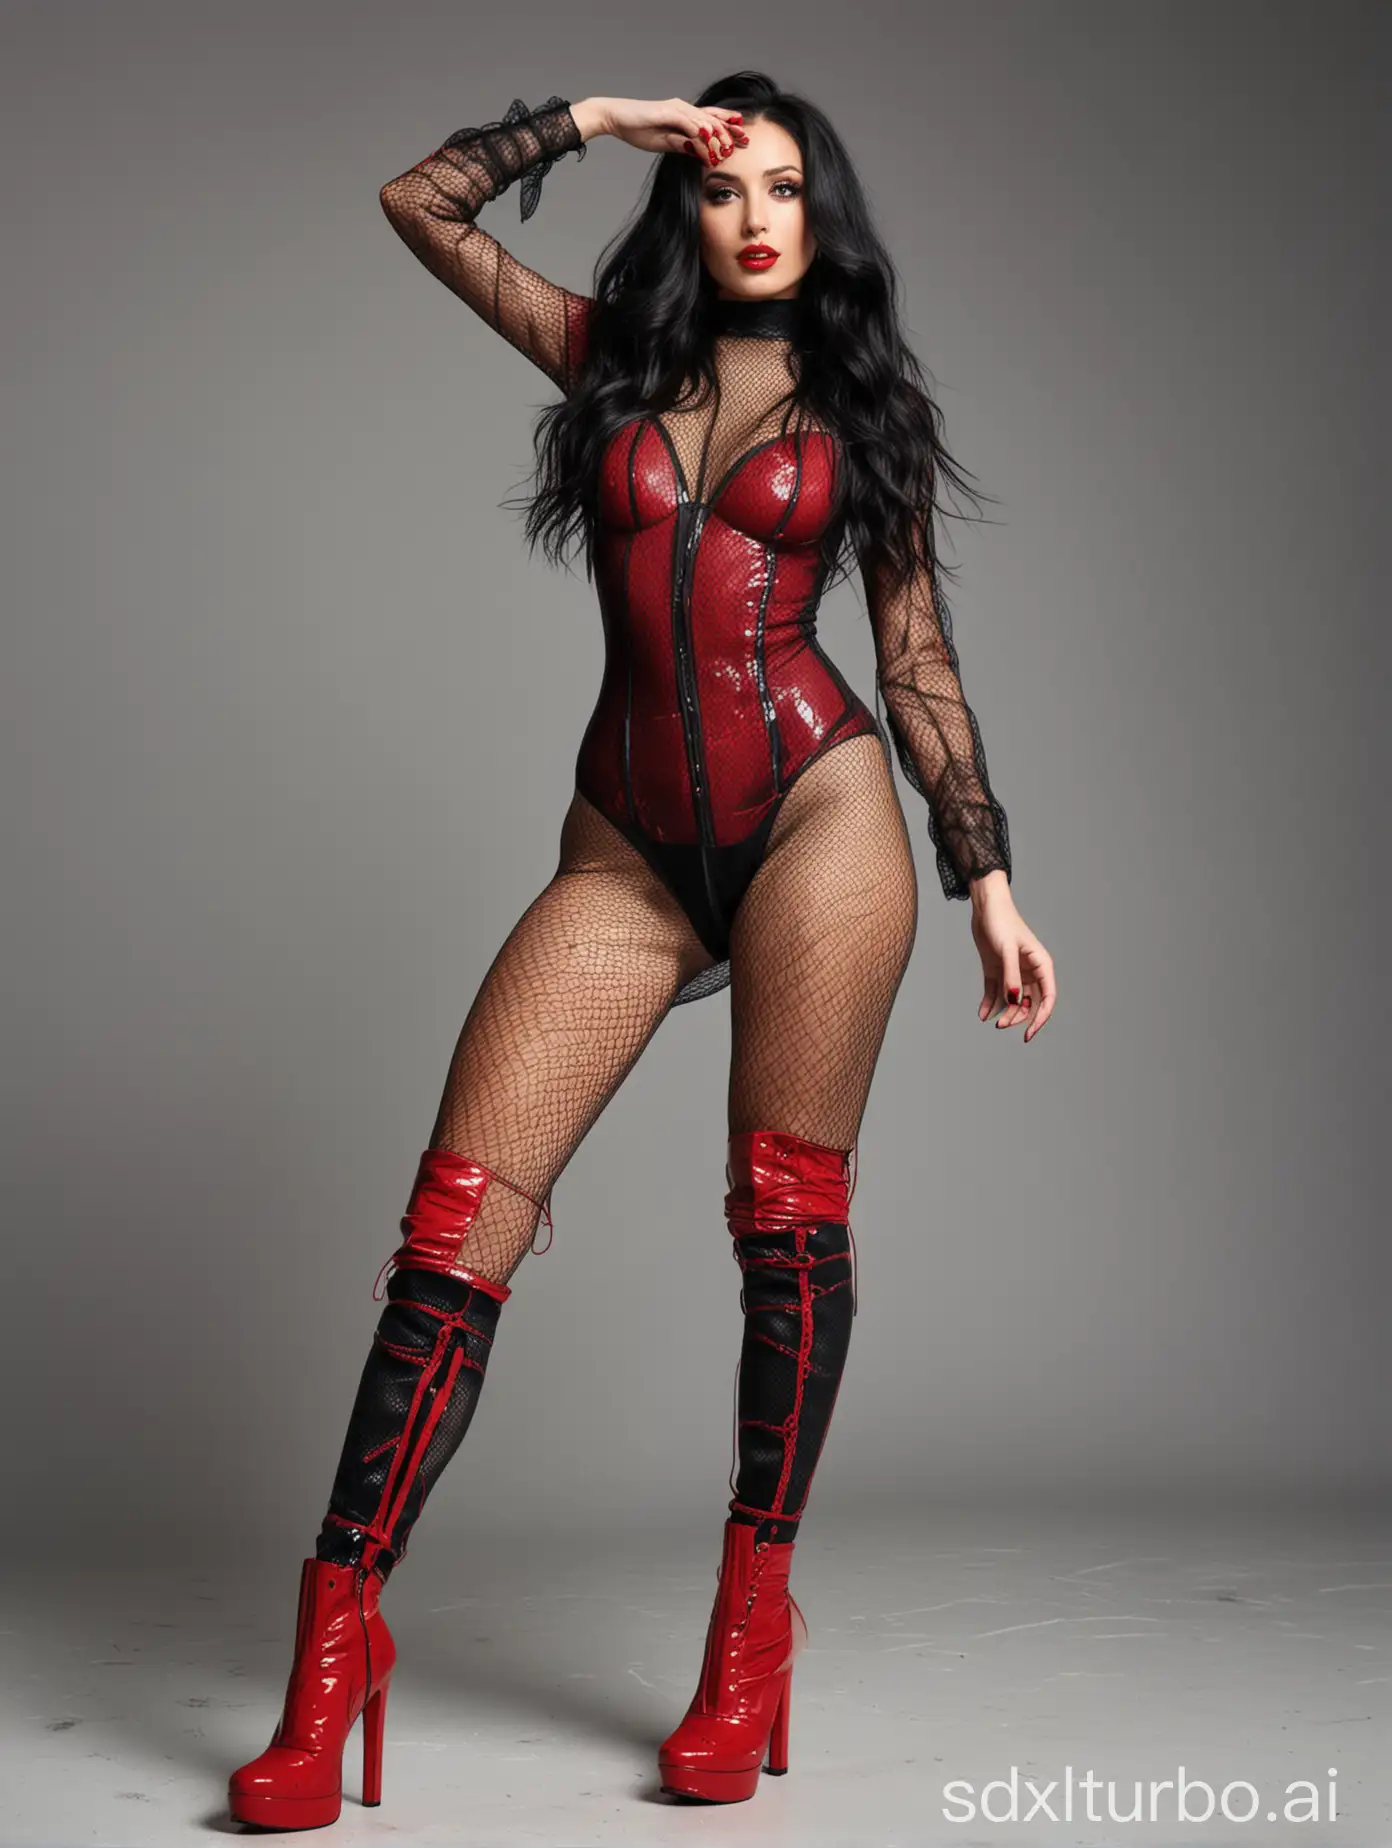 sexy woman with black medium long vaweing hair in red highhealed boots, dressed with black netfish tight body